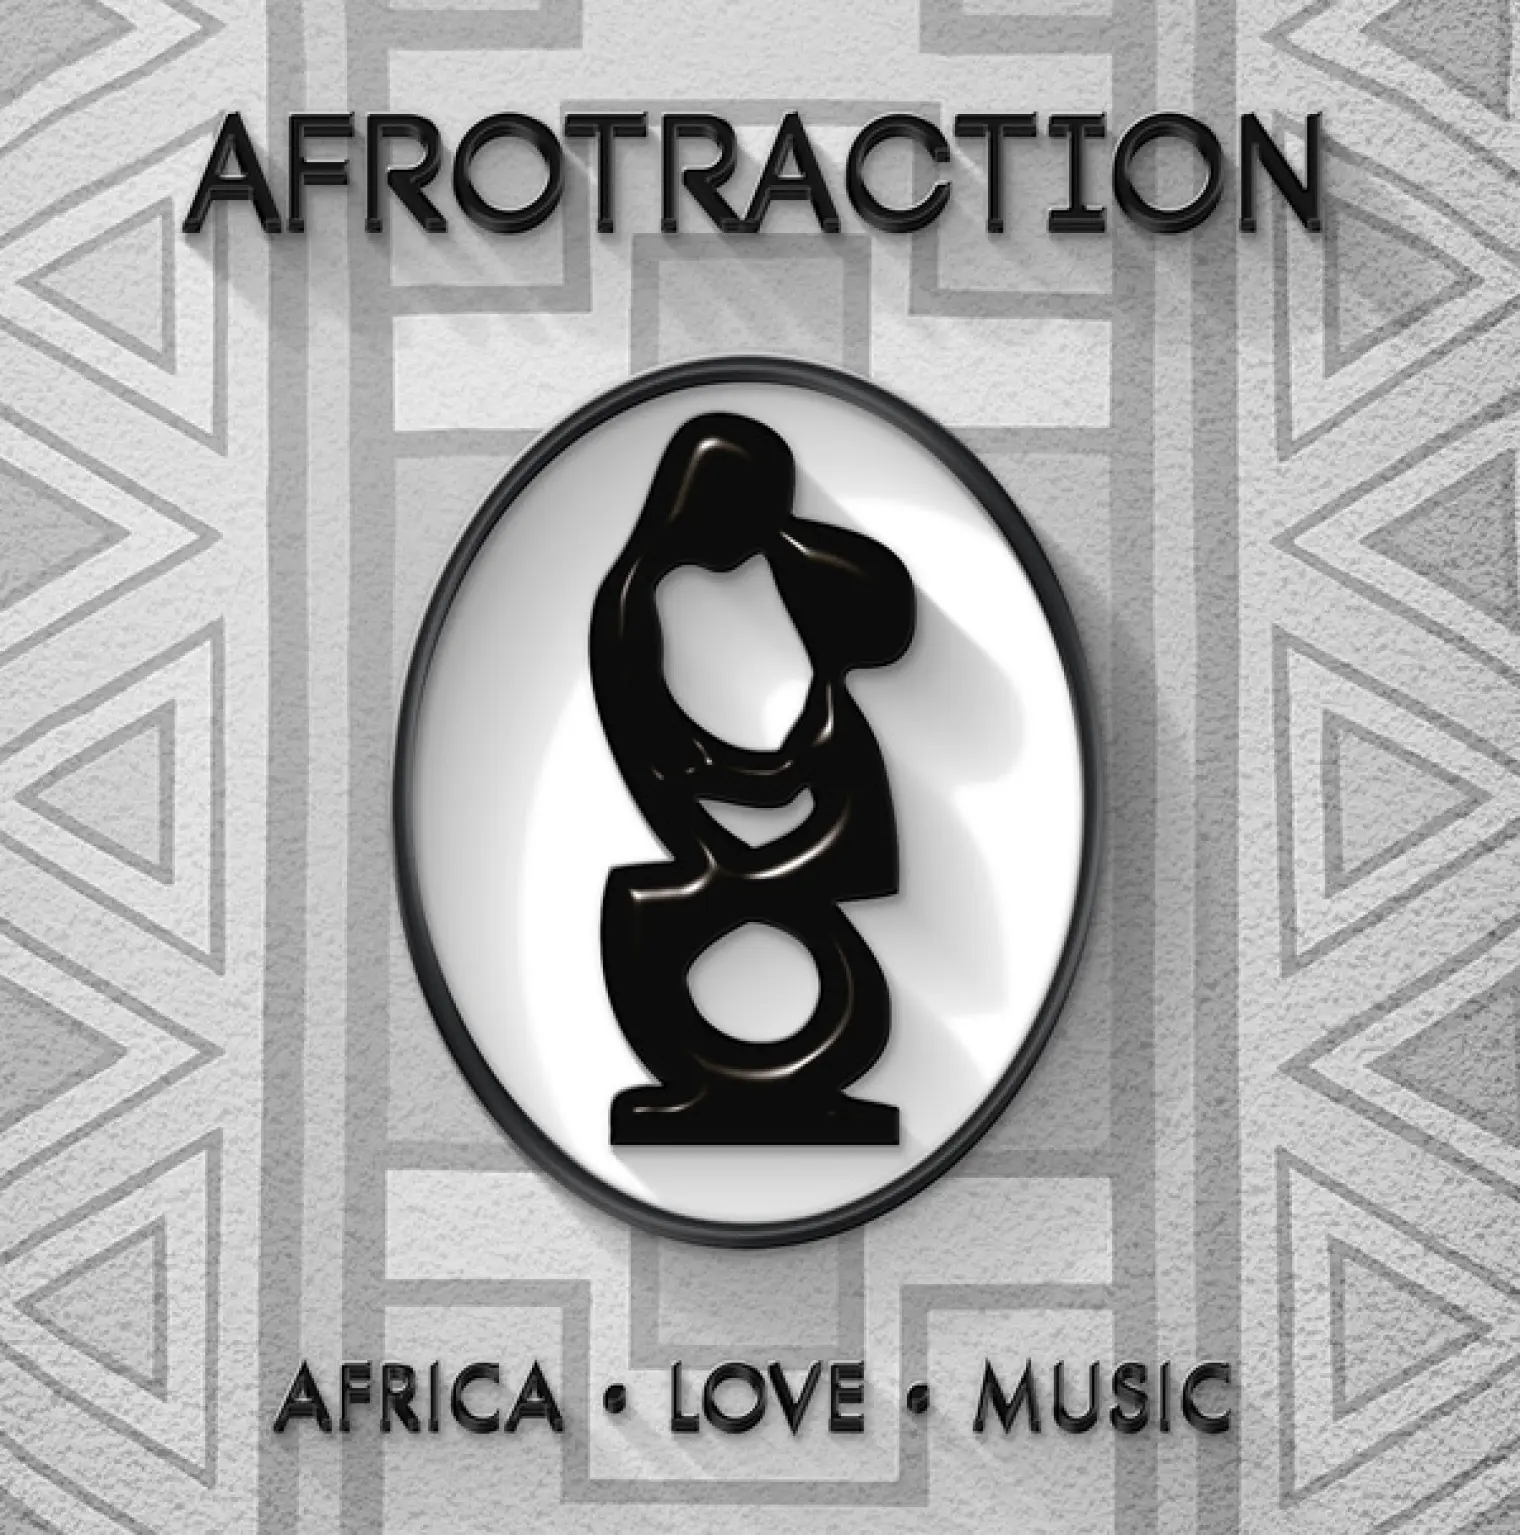 Africa. Love. Music -  Afrotraction 